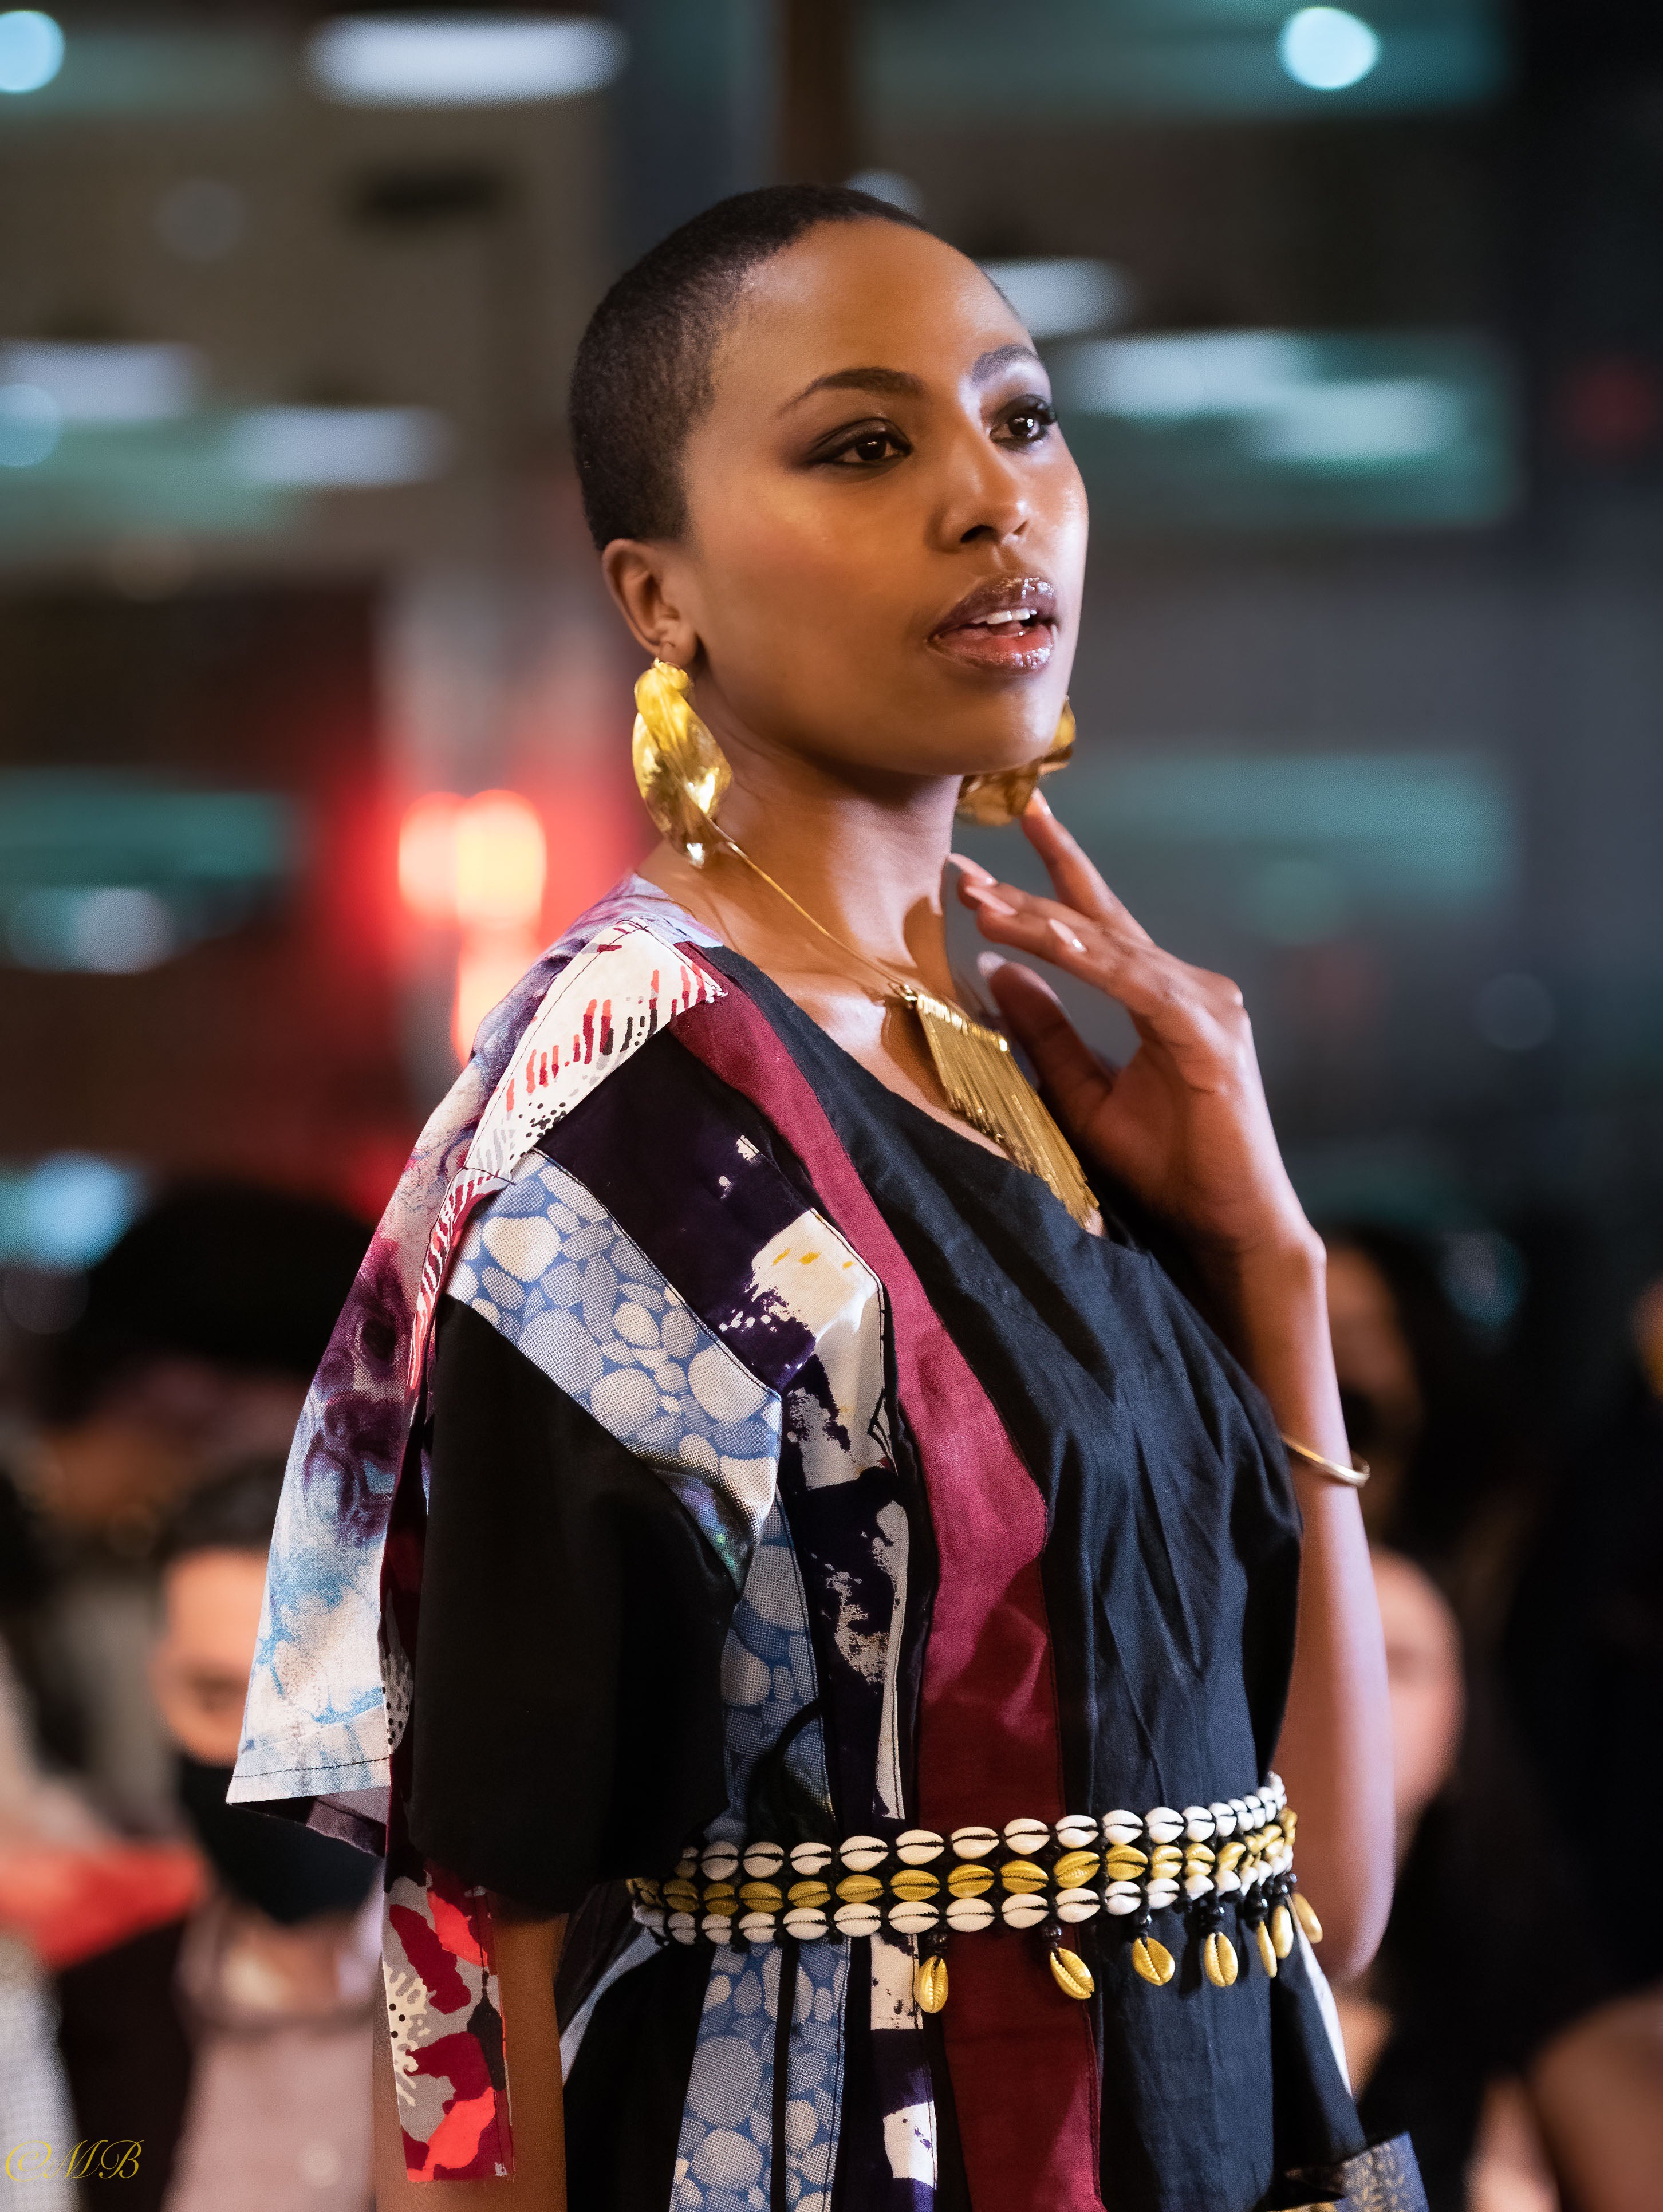 Black Monarchy featured during NYFW, with Miss Kenya 2015, Charity Mwangi